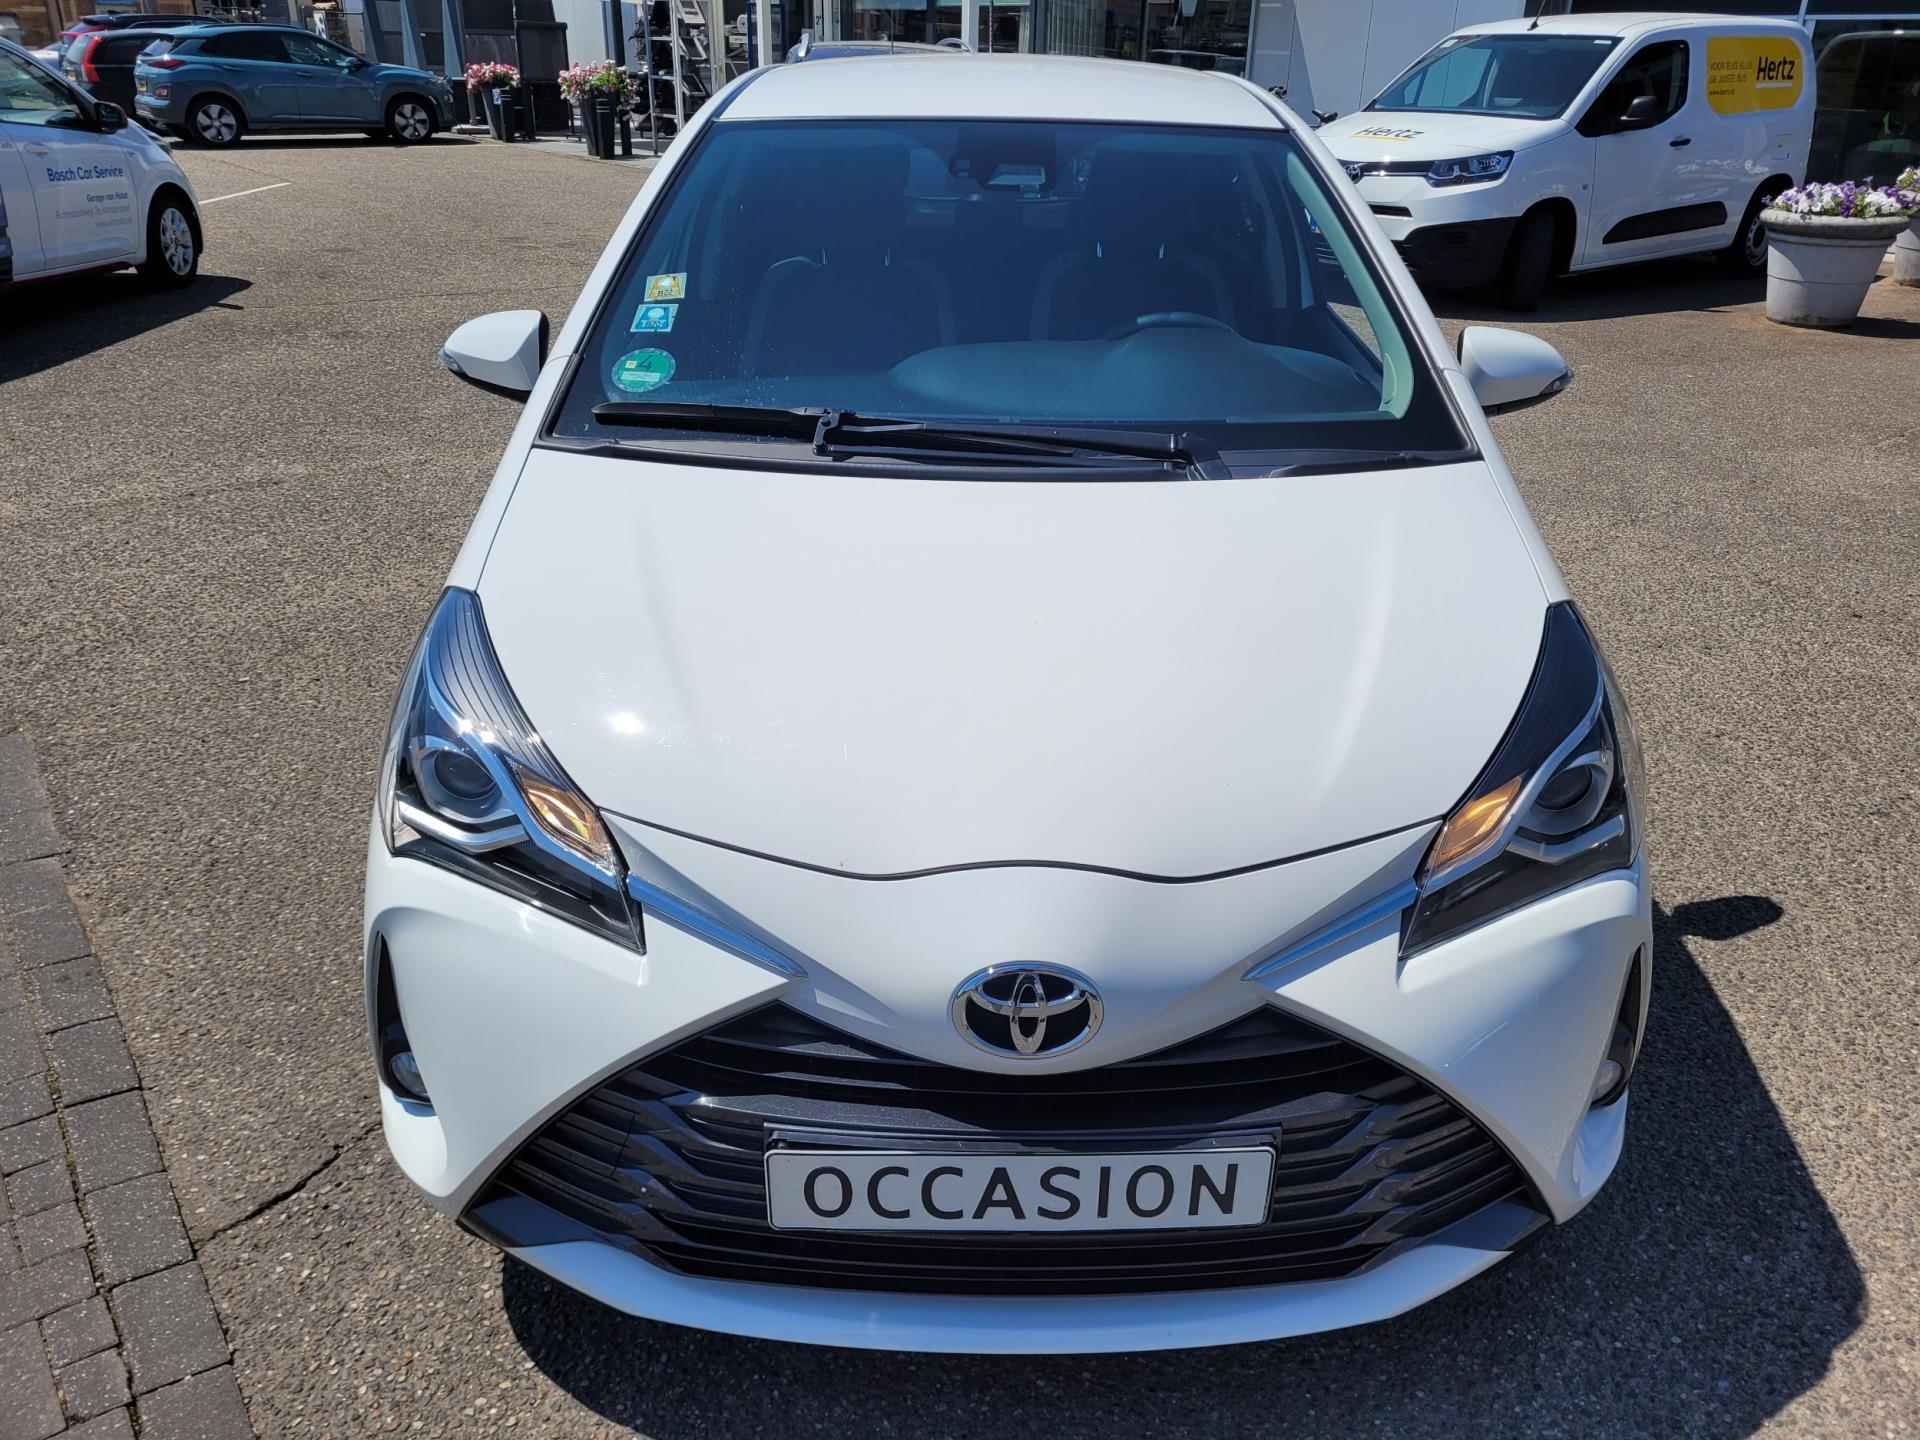 Toyota Yaris 1.5 VVT-i Dynamic Y20 AUTOMAAT / APPLE+ANDROID CAR PLAY / BTW Auto - 3/30